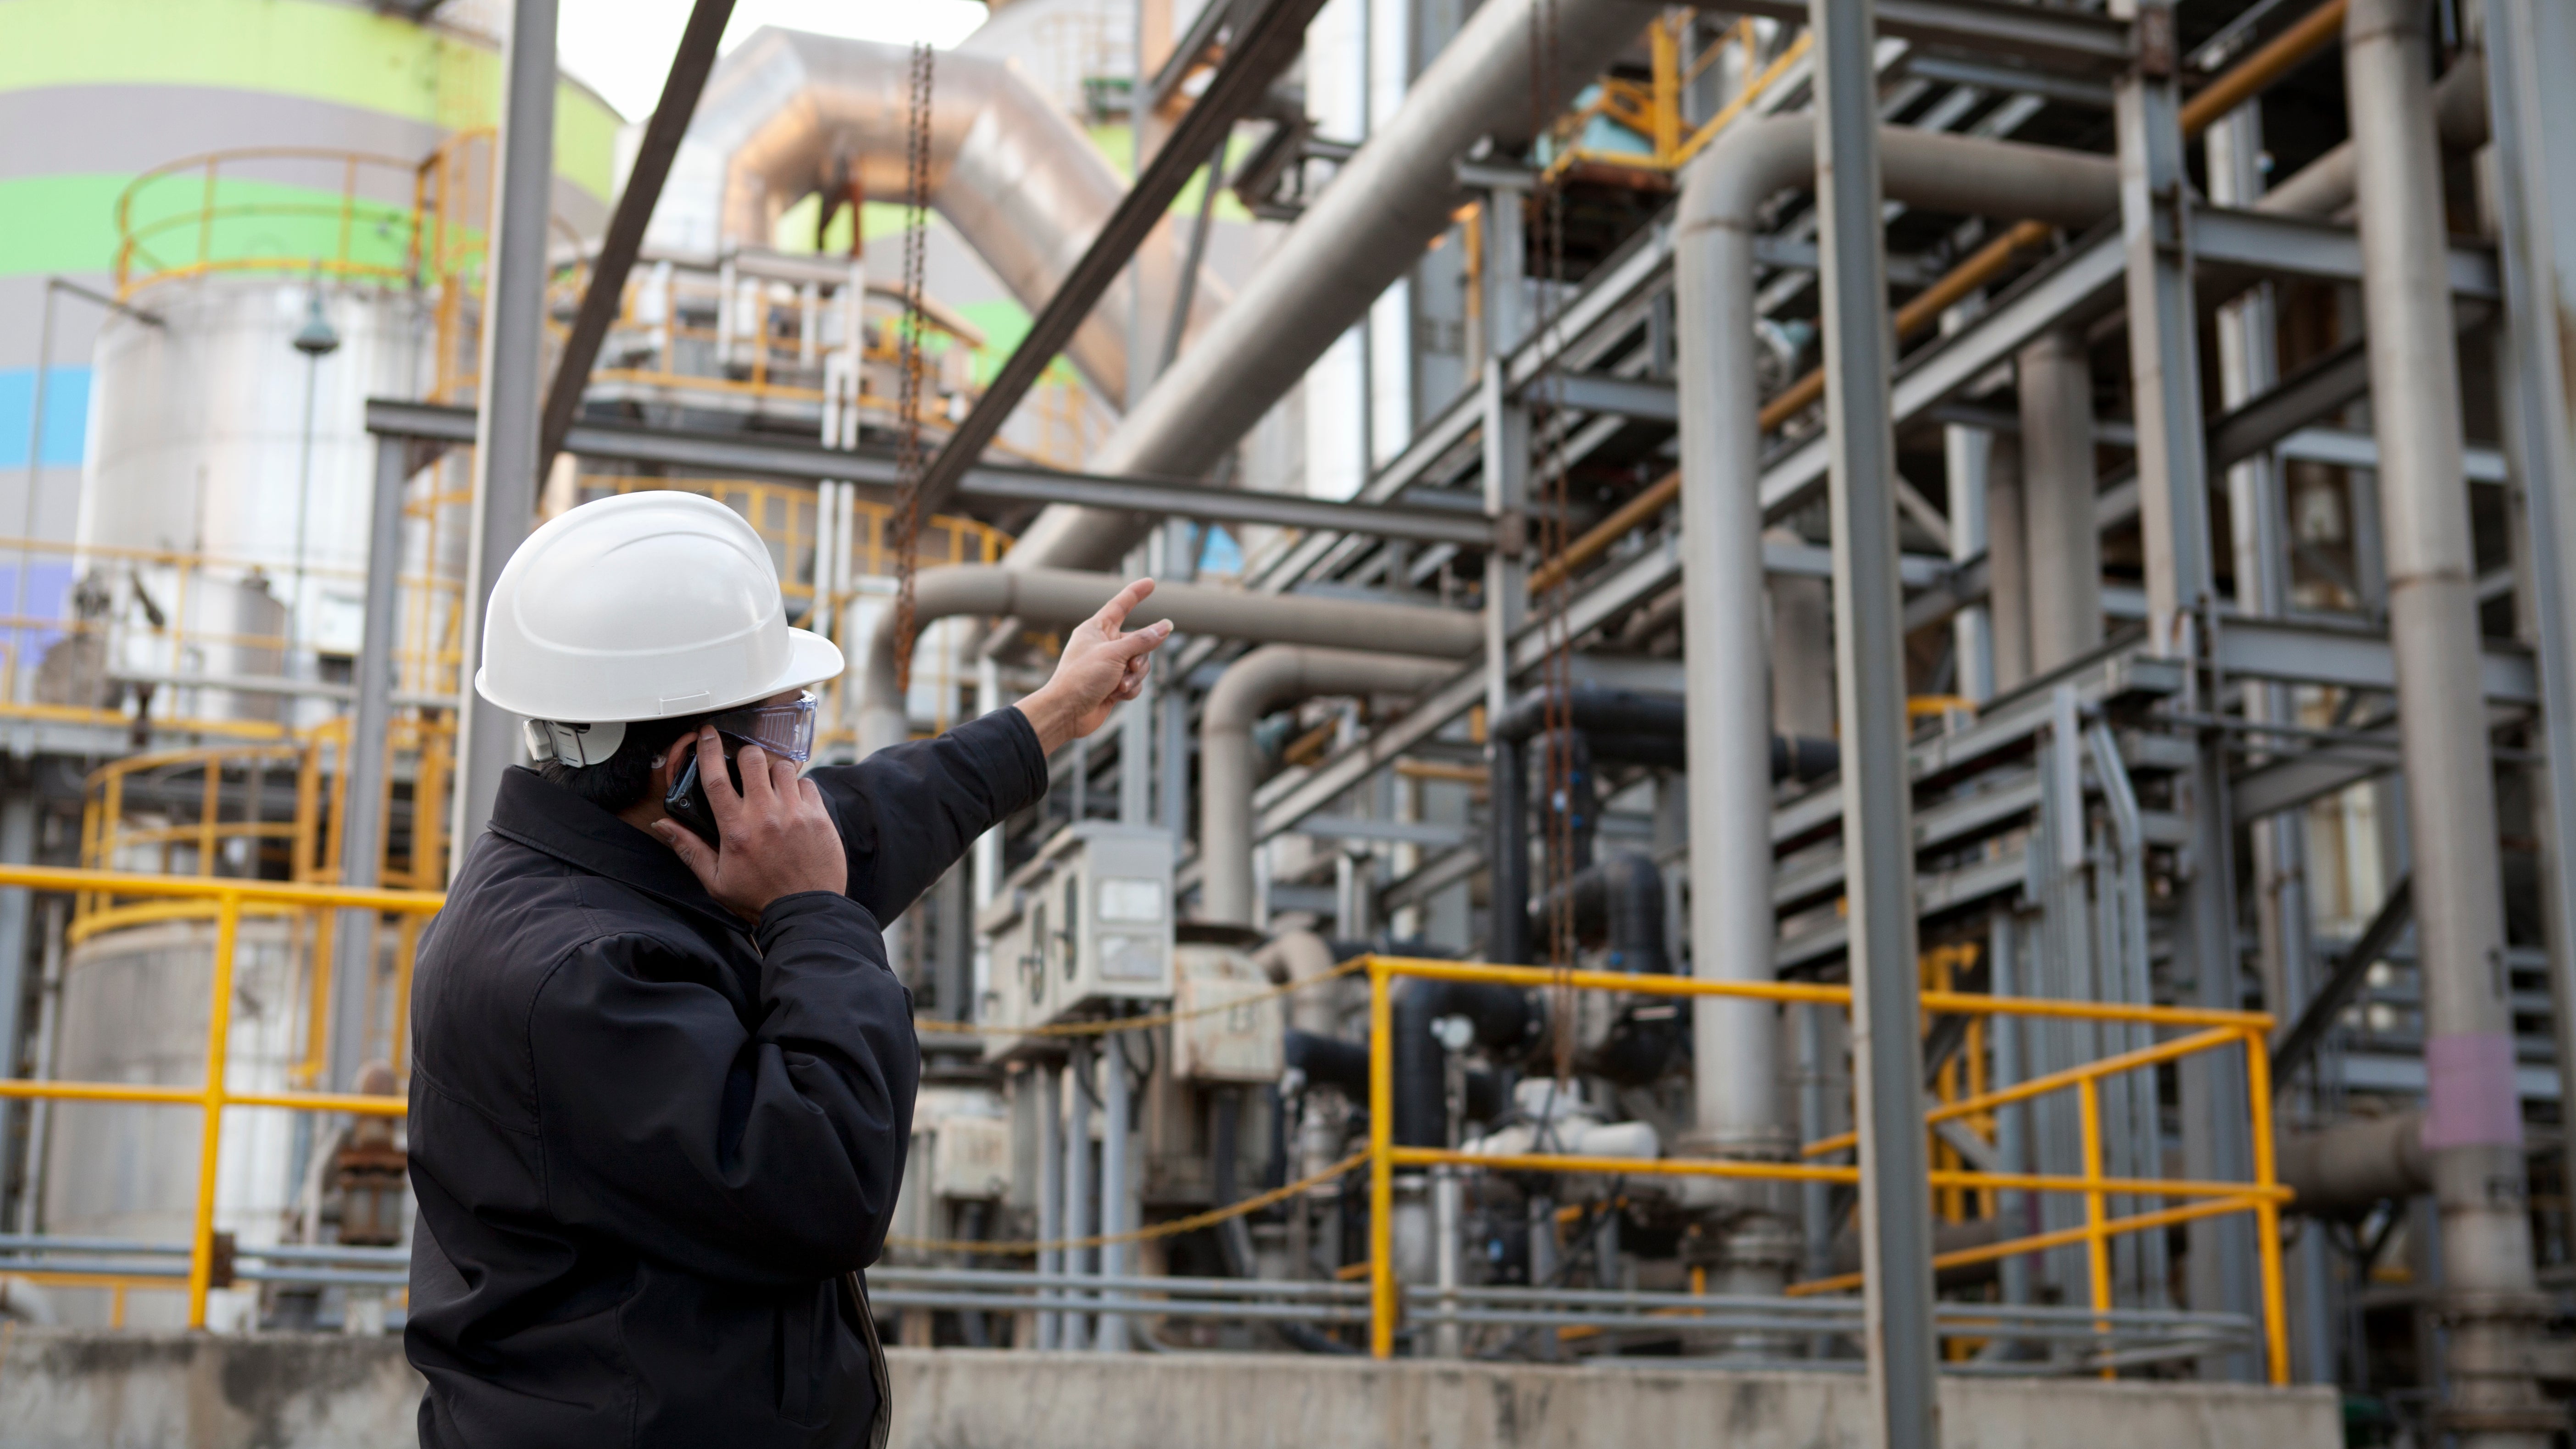 Oil refinery engineer pointing against pipeline